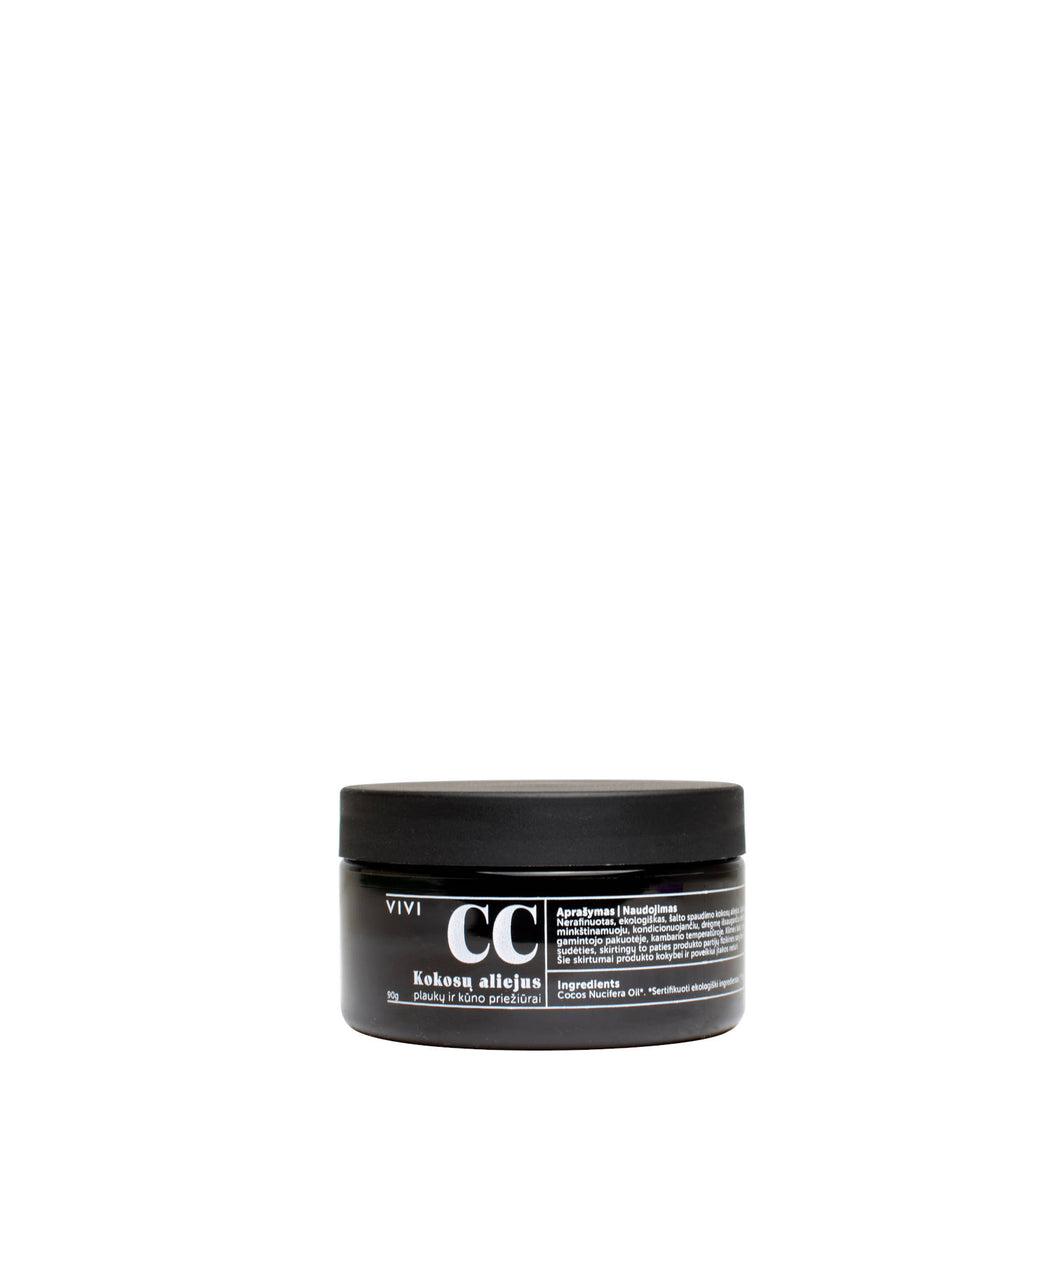 Coconut oil for hair and body care, 90g.